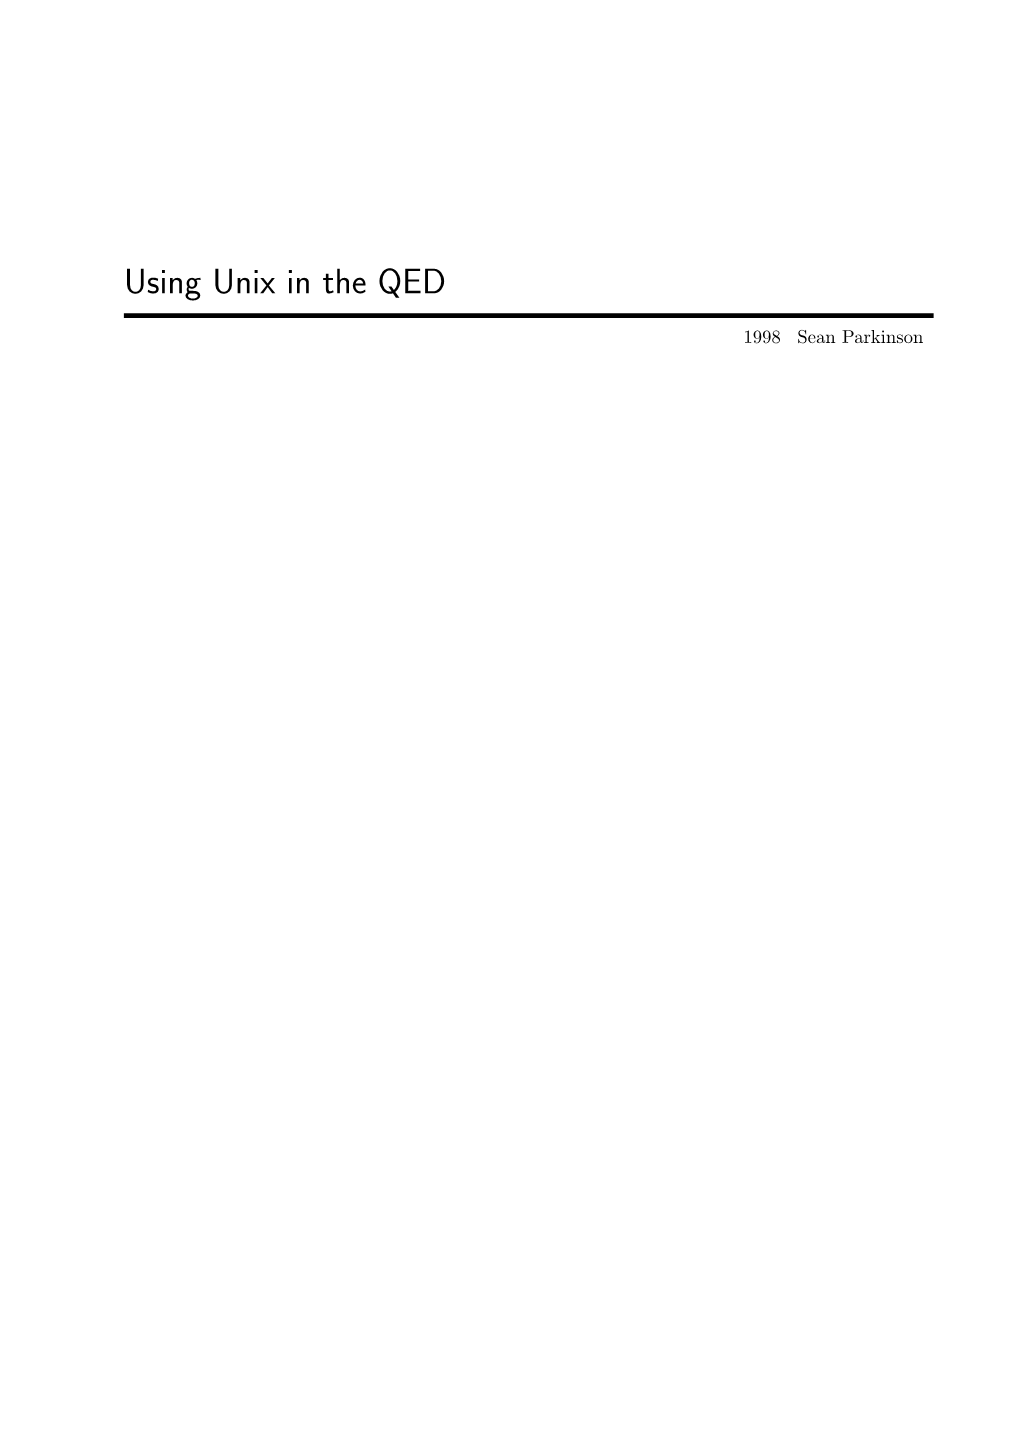 Using Unix in the QED